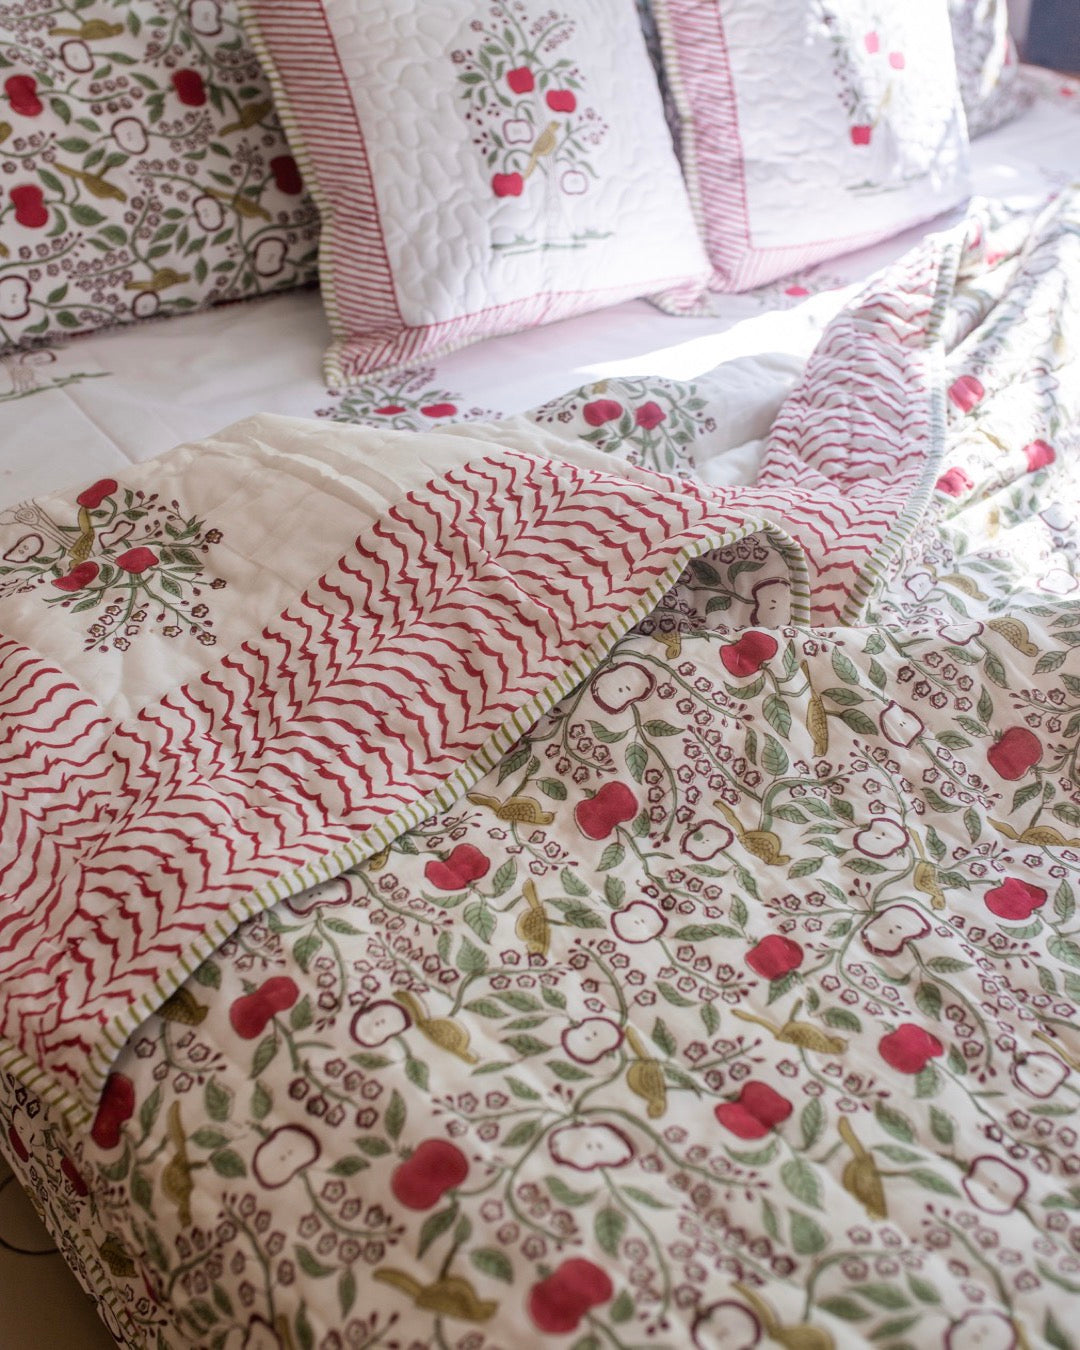 Apple orchard themed quilt on bed